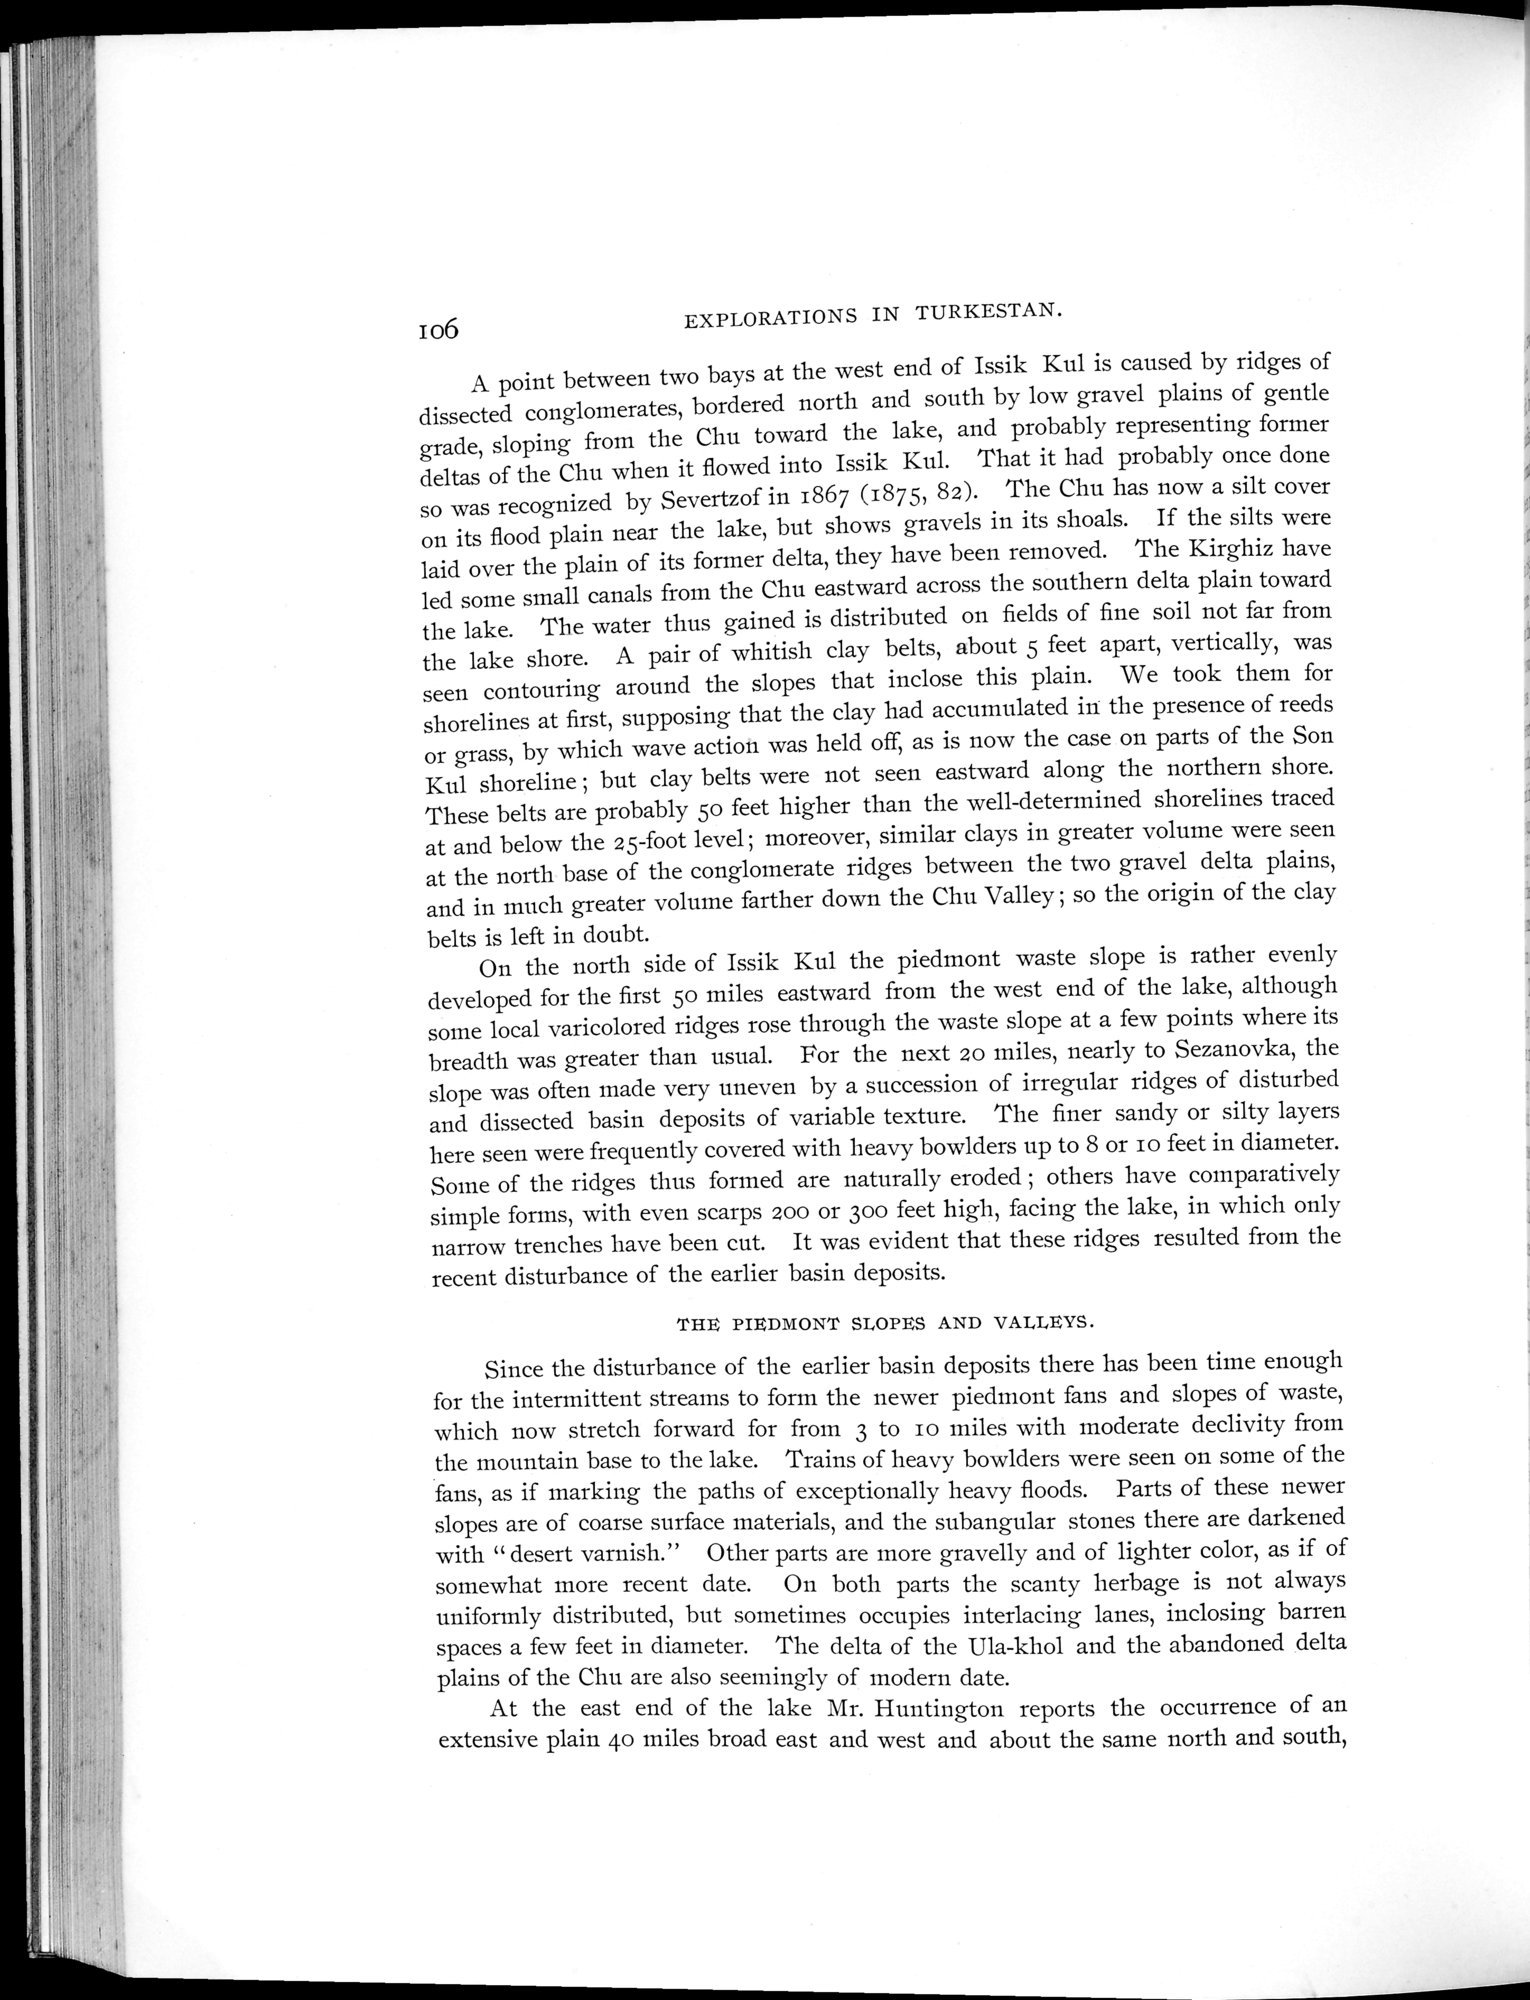 Explorations in Turkestan 1903 : vol.1 / Page 130 (Grayscale High Resolution Image)